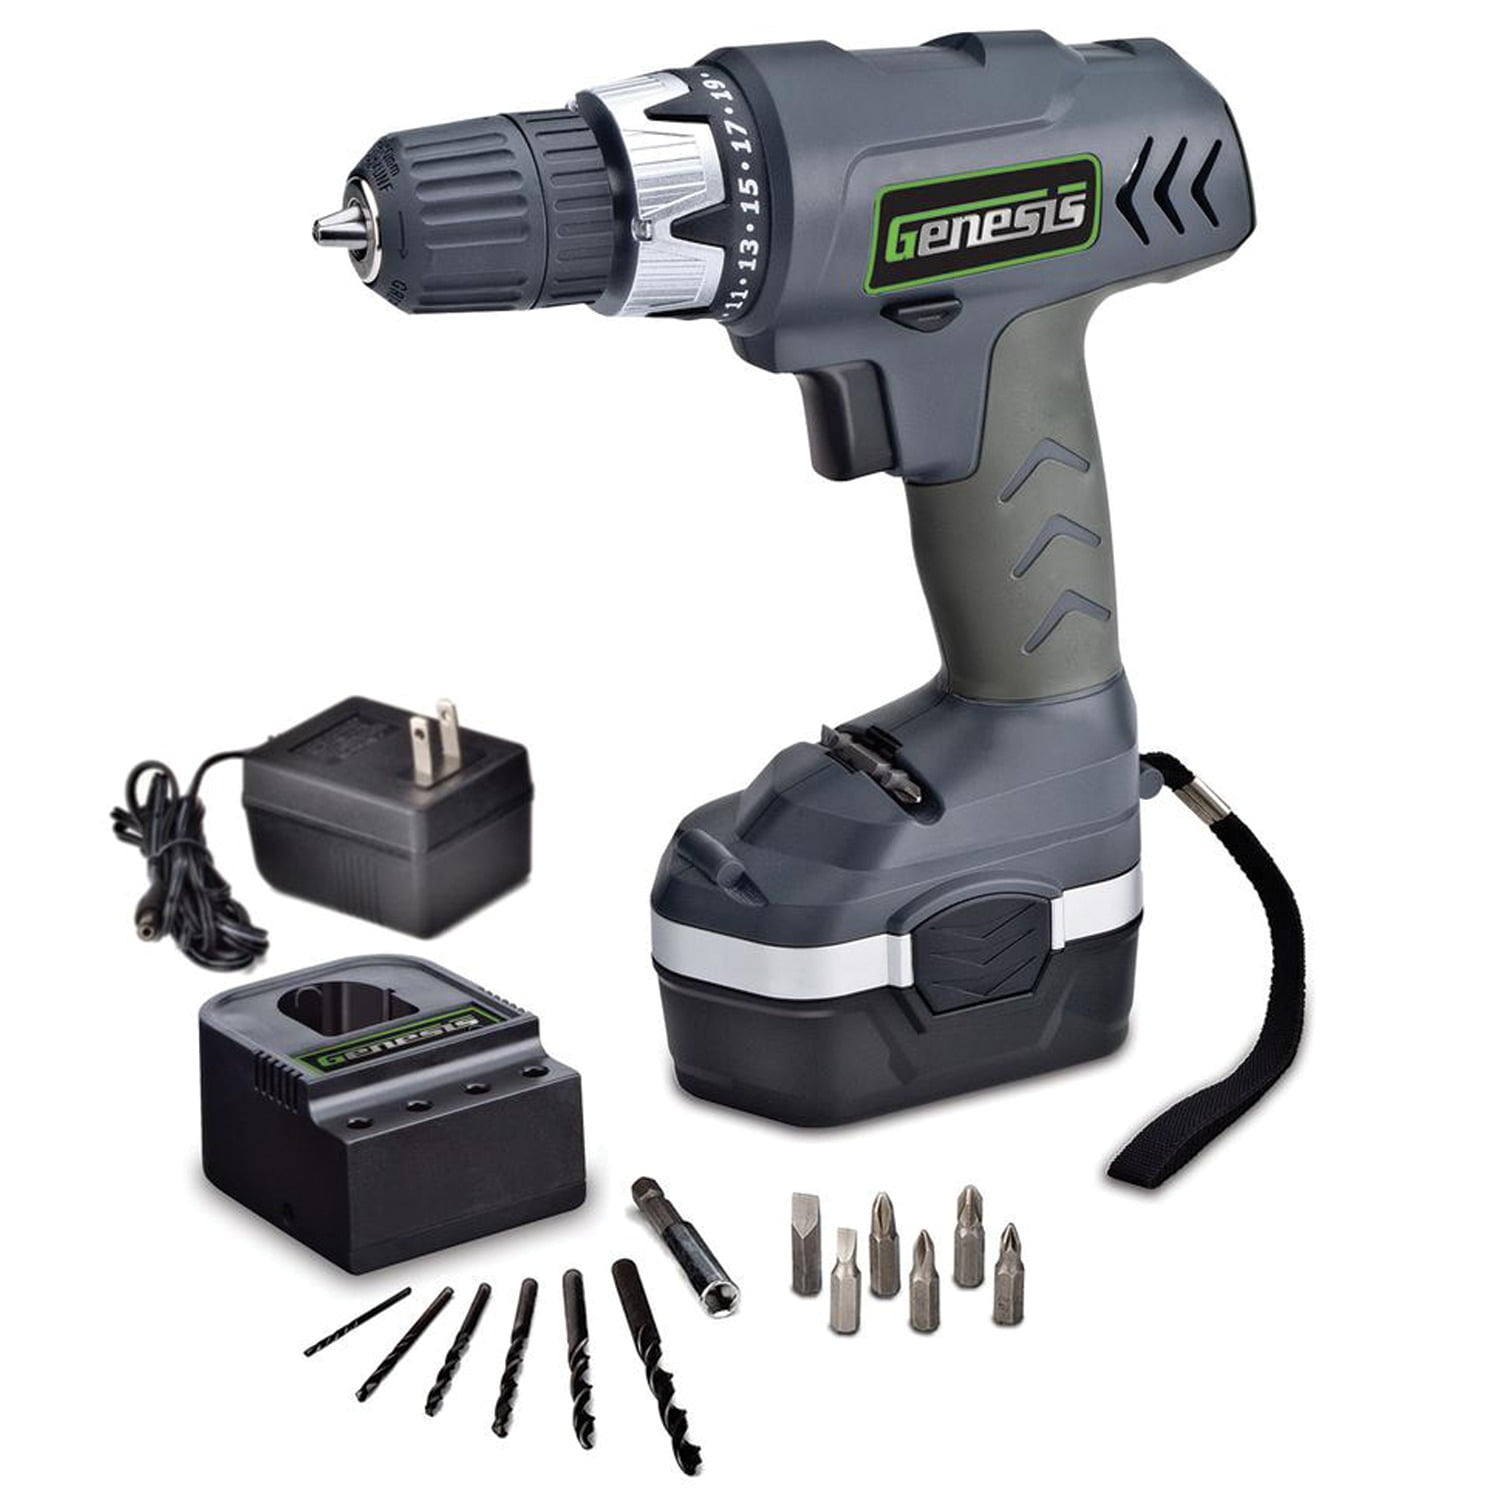 Channel Lock 20V Max 1/2" Cordless Drill Driver Battery Drill w/charger 